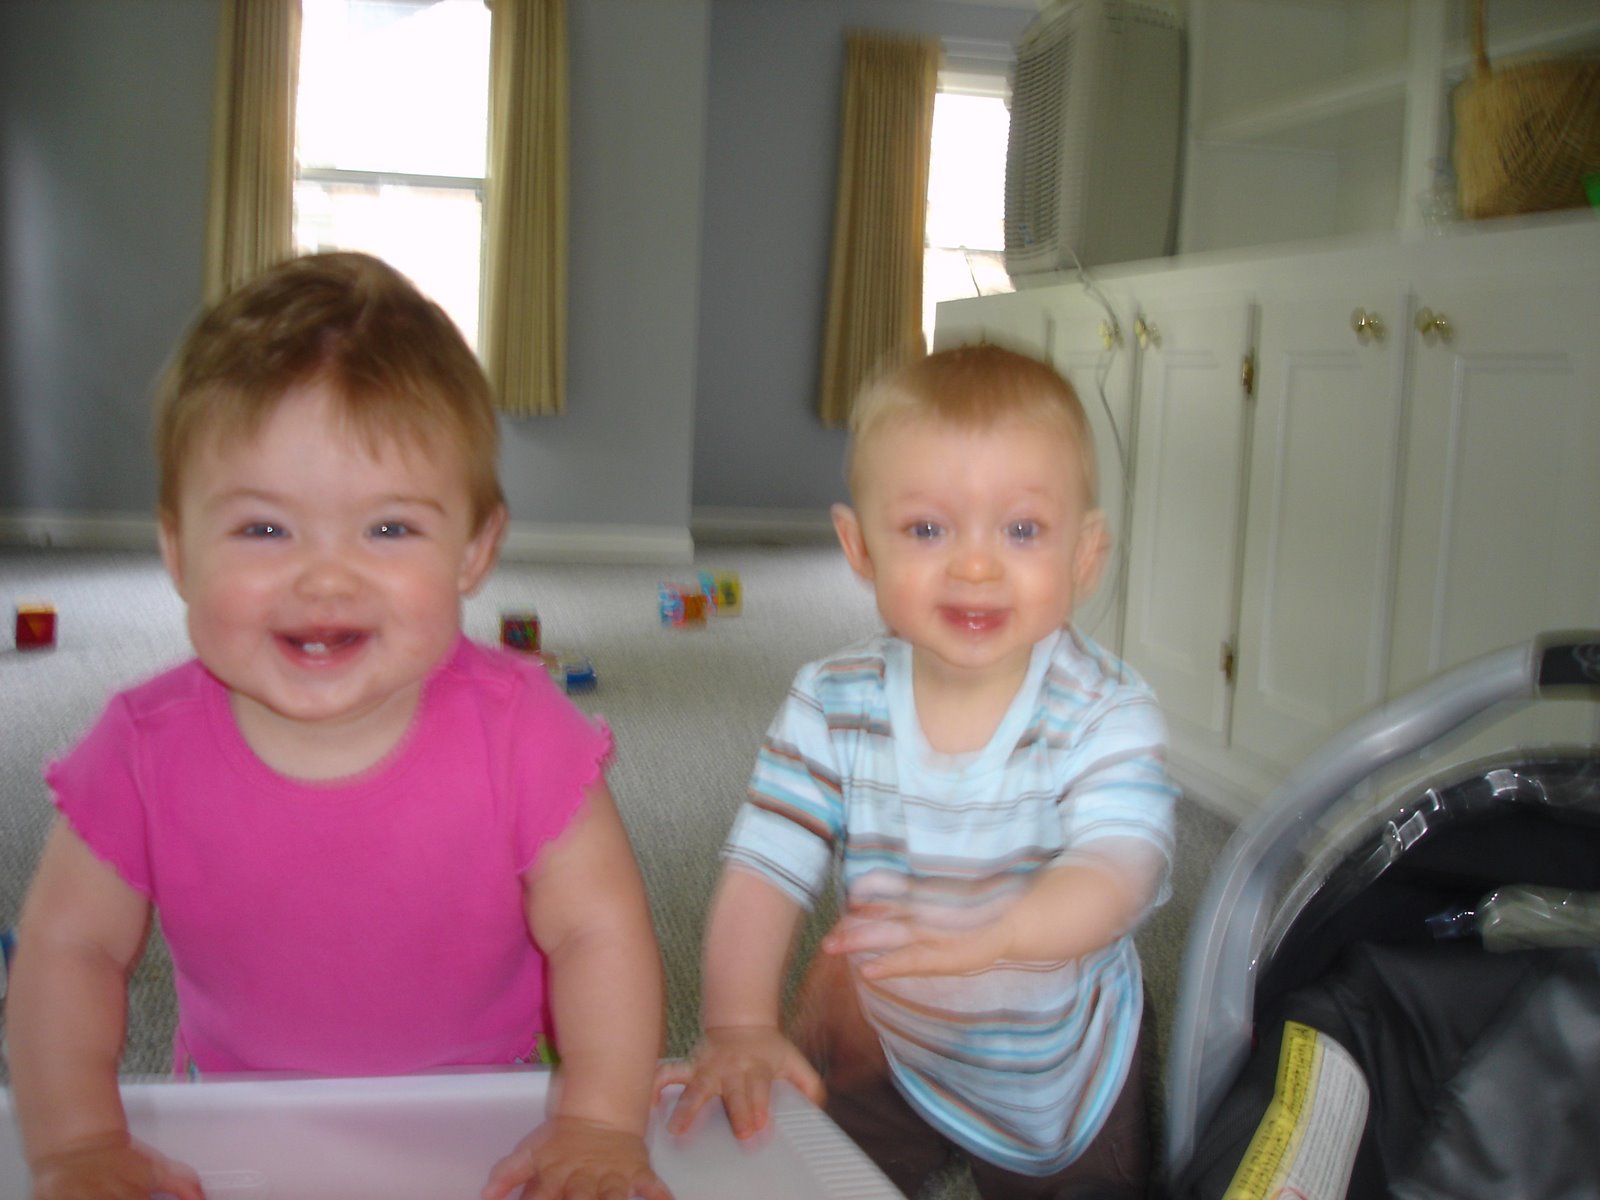 [twins+are+happy+to+be+in+new+home.JPG]